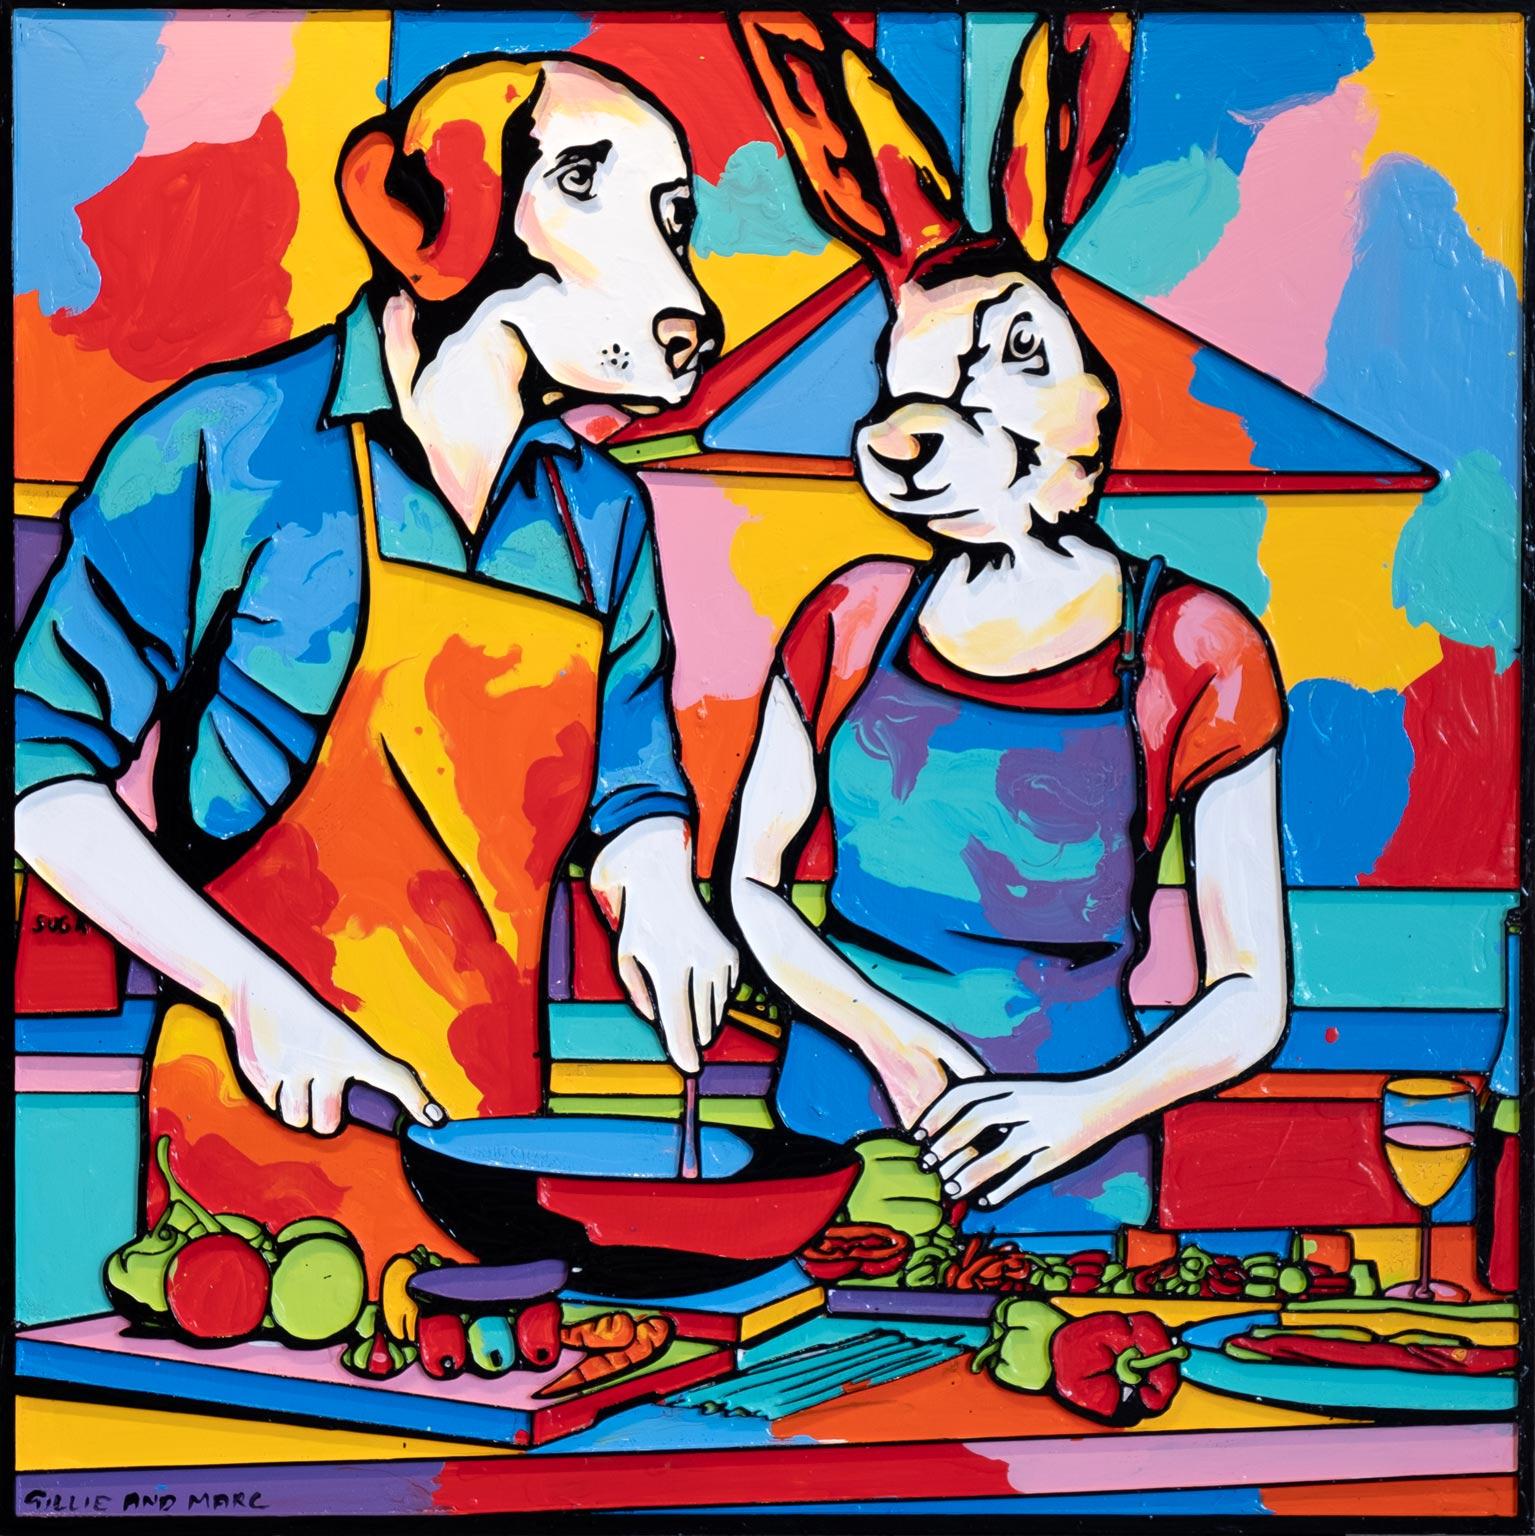 Gillie and Marc Schattner Interior Print - Pop Art - Animal Print - Gillie and Marc - Limited Edition -Kitchen colour fun